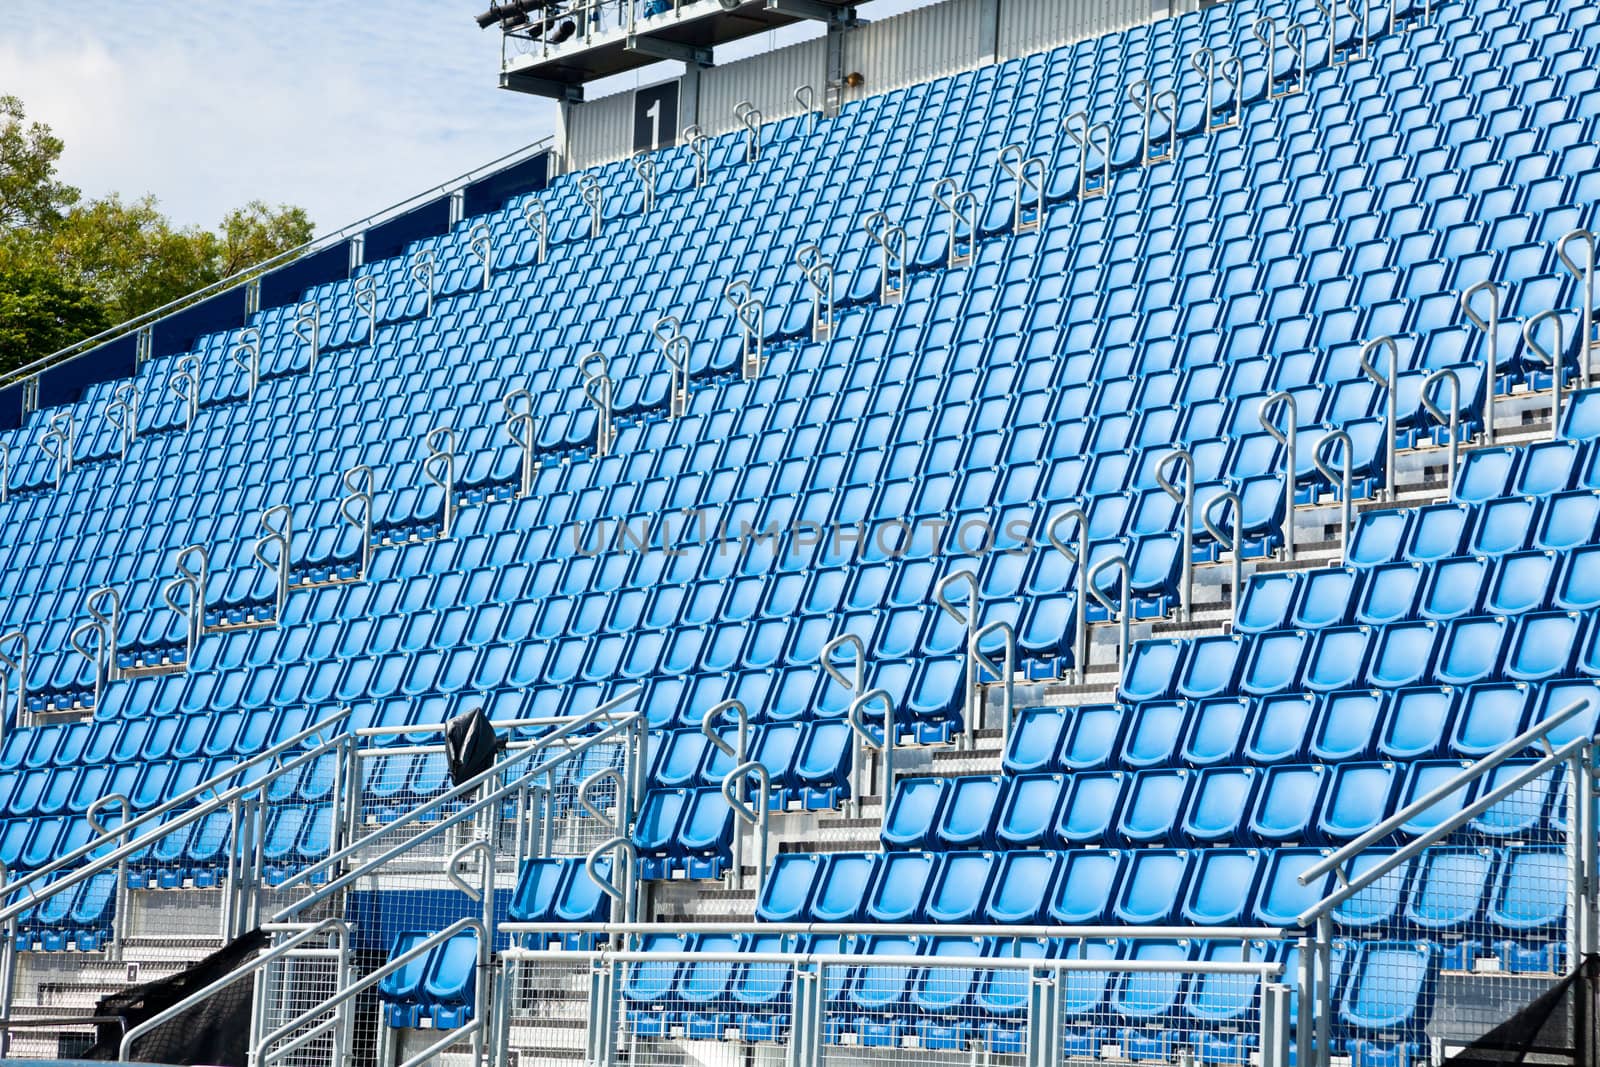 Folded blue plastic chairs on a temporary tribune